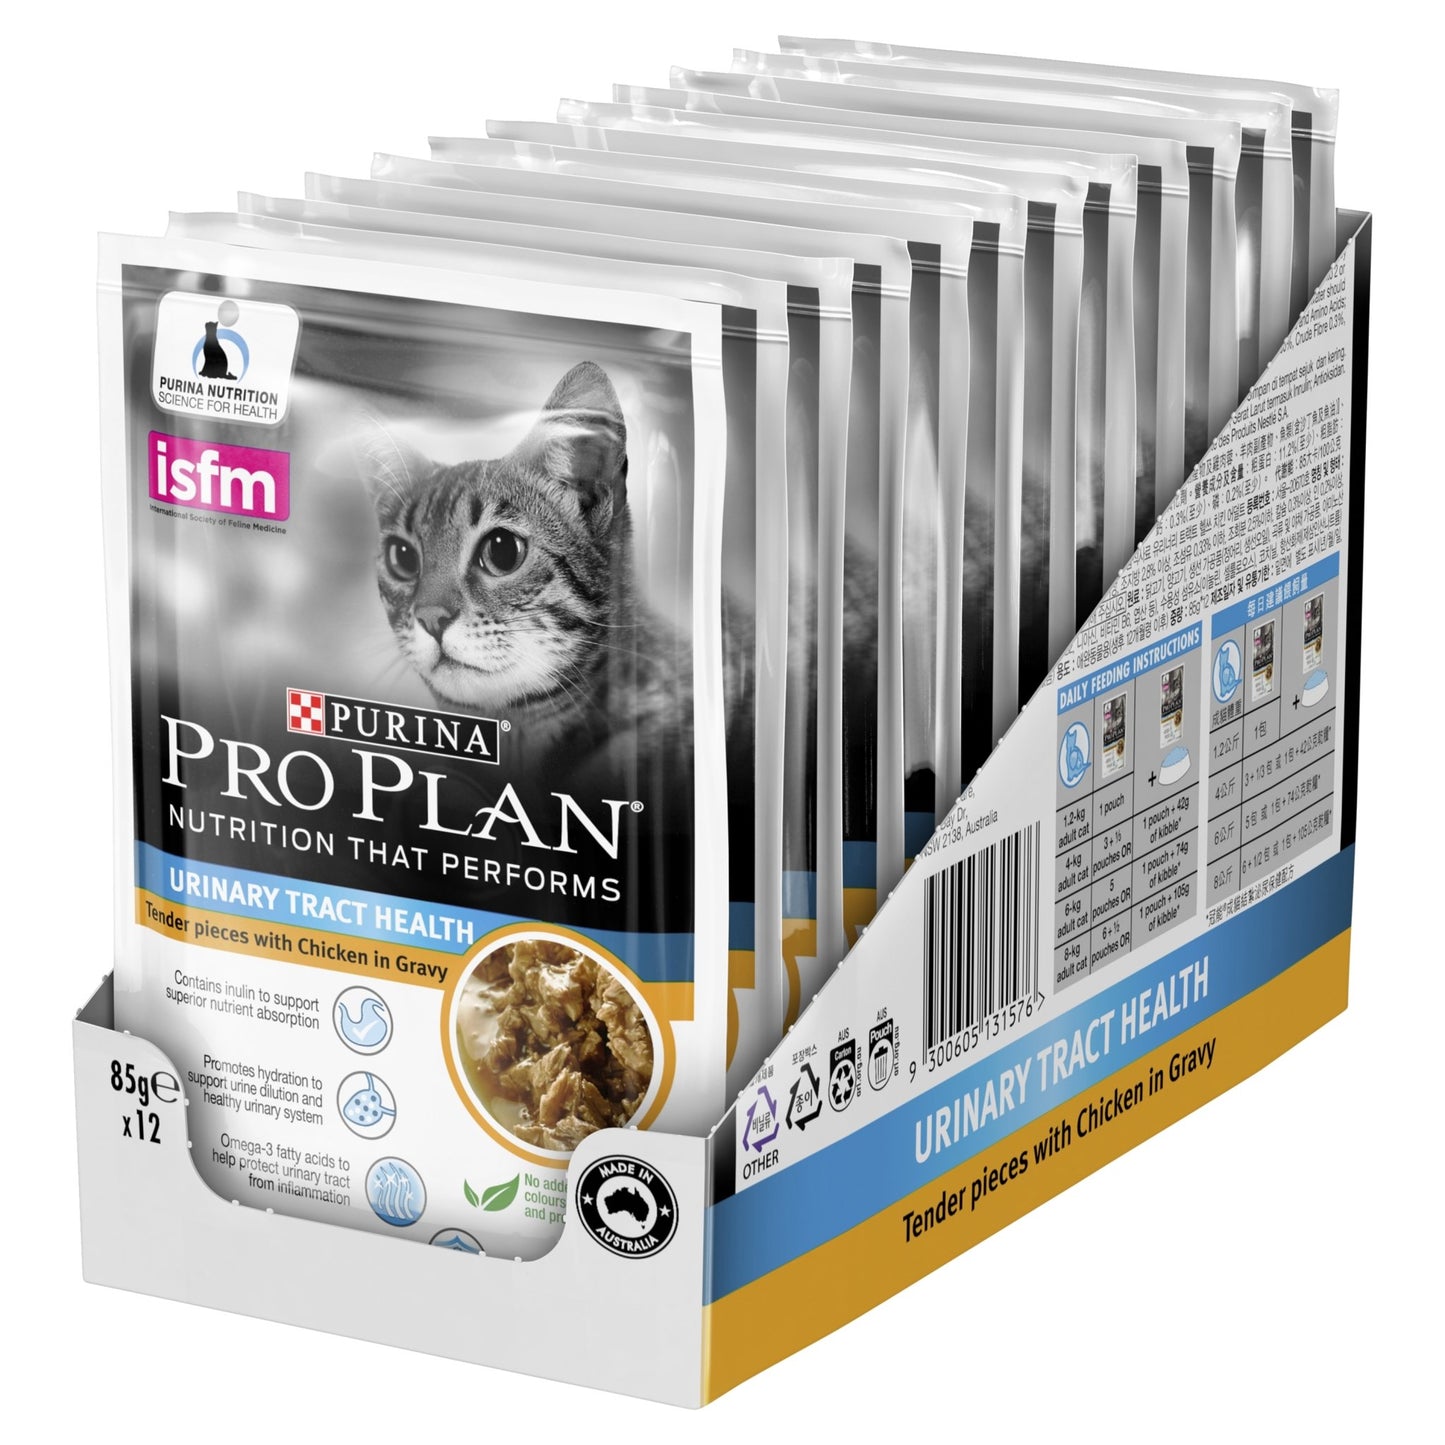 Pro Plan Cat Wet Pouches Urinary Tract Health 12x85g - Woonona Petfood & Produce